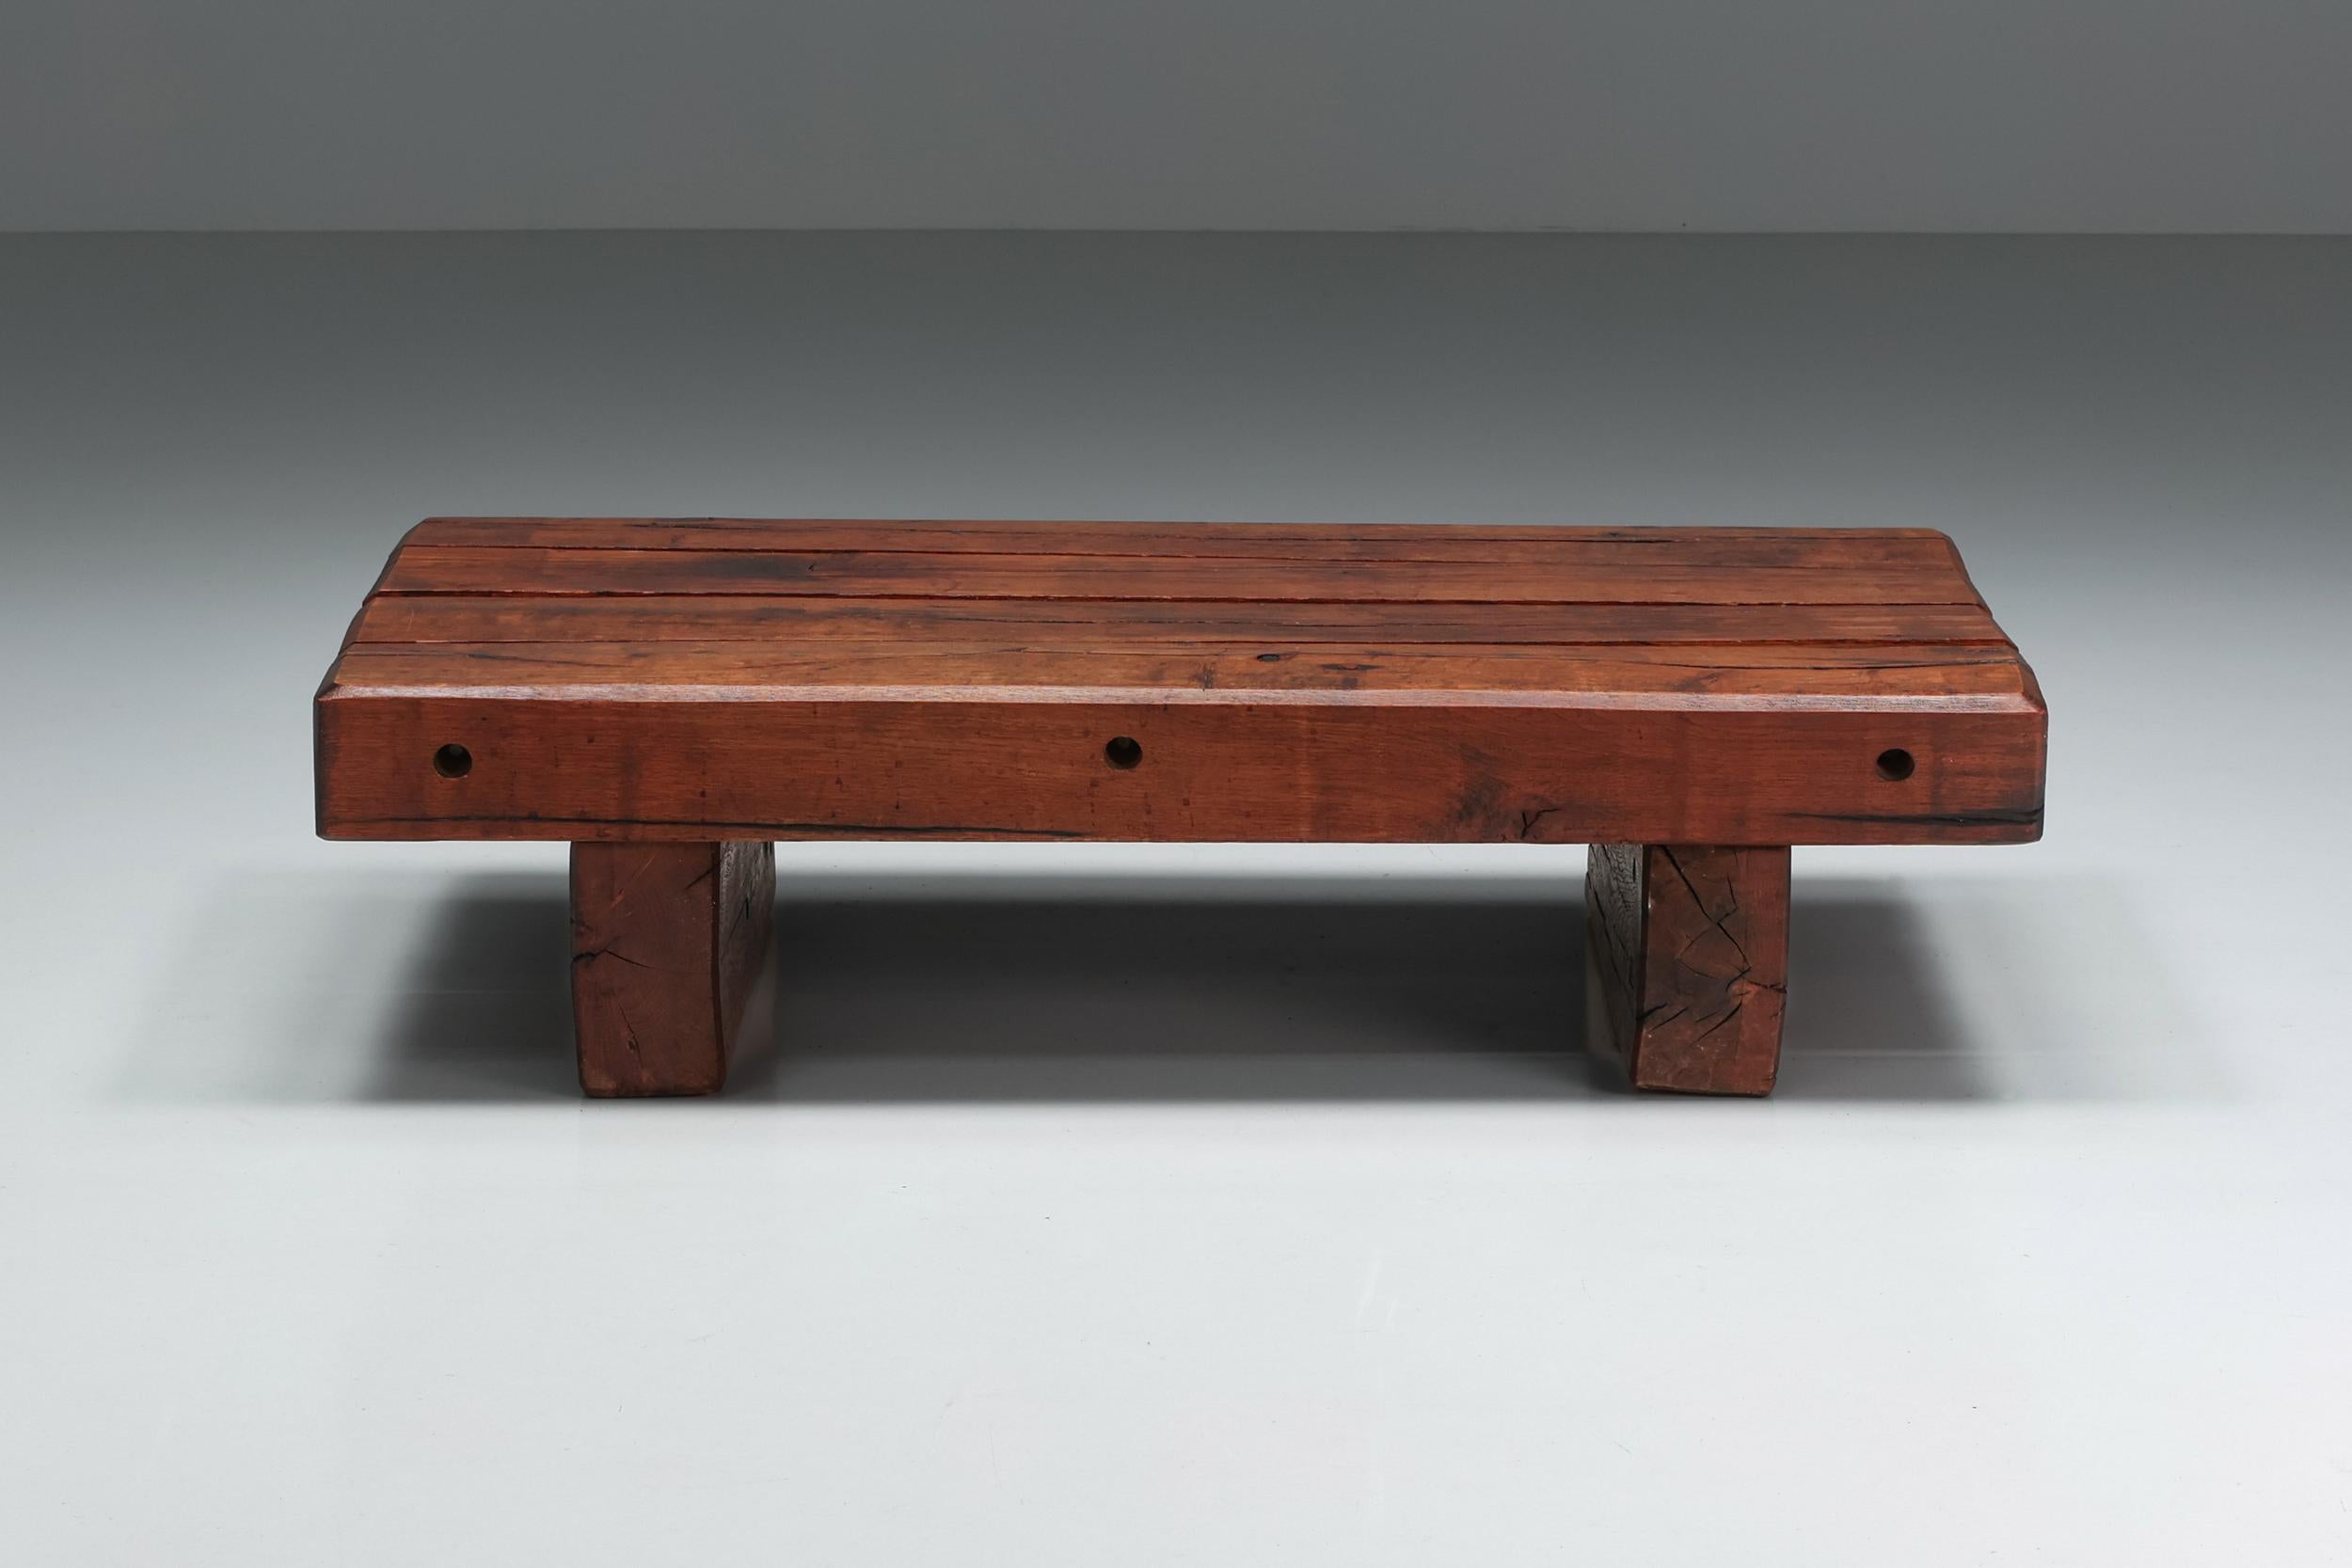 Rustic wooden coffee table made in Italy in the 1940s. The tabletop is connected to two wooden feet that make up the base of the coffee table. The tabletop has three perfectly crafted wholes in them on the side. The charismatic patina shows the